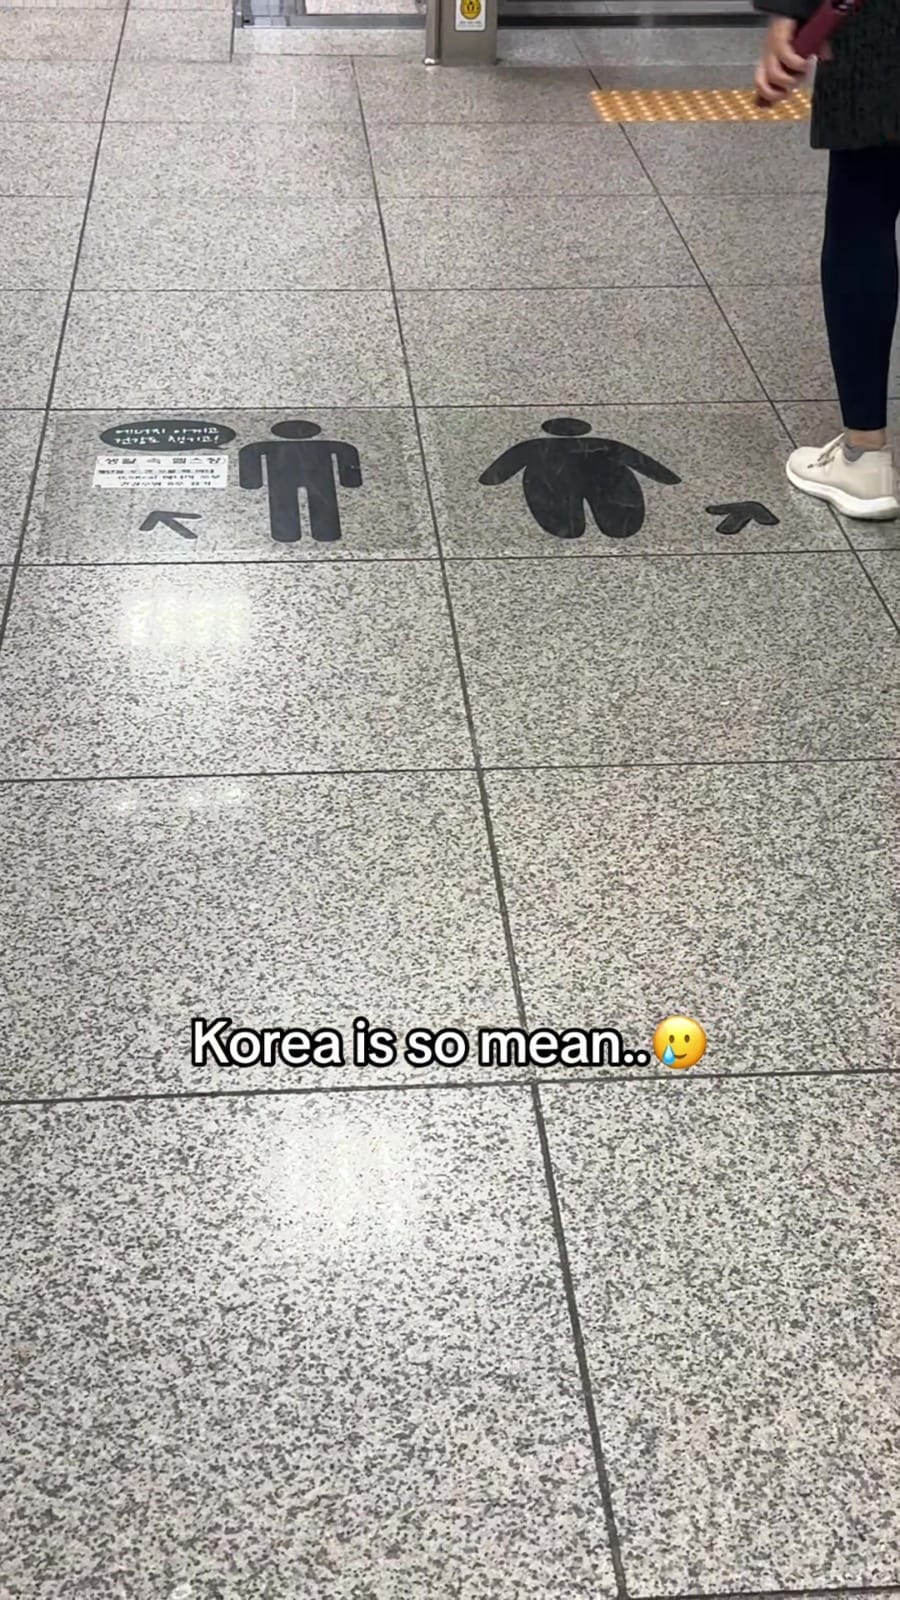 korea train station signs fat shamed encourage commuters take stairs instead of escalator 1